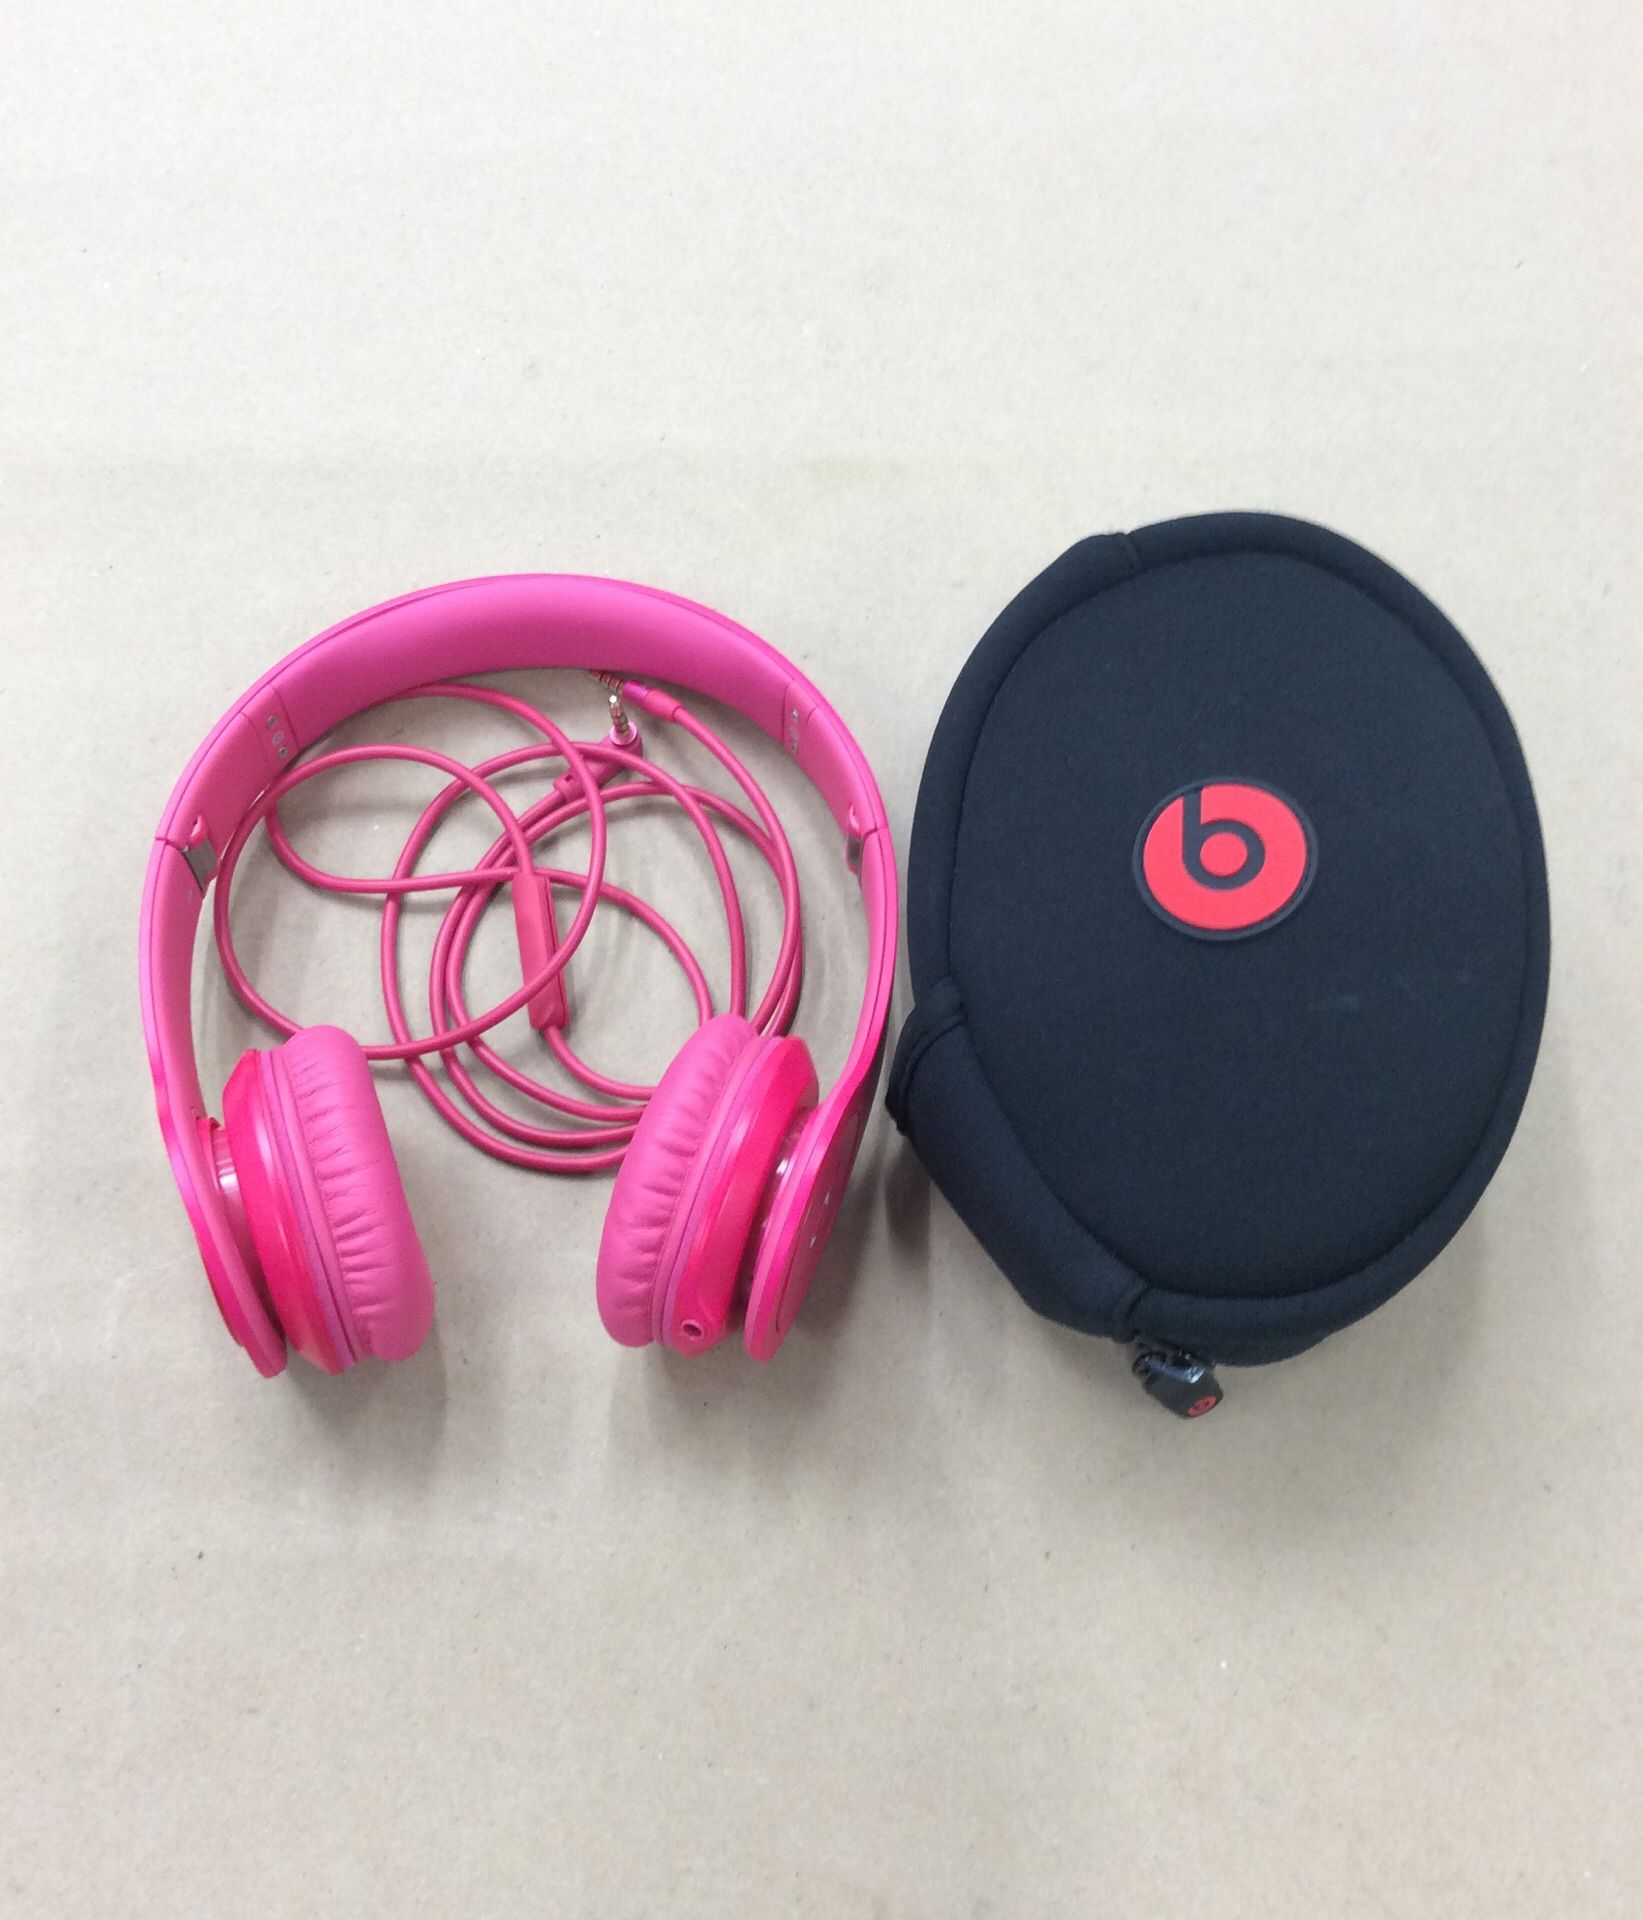 Beats by Dre Solo HD Headphones w/ Removable Aux Cord and Soft Case (19-1690)